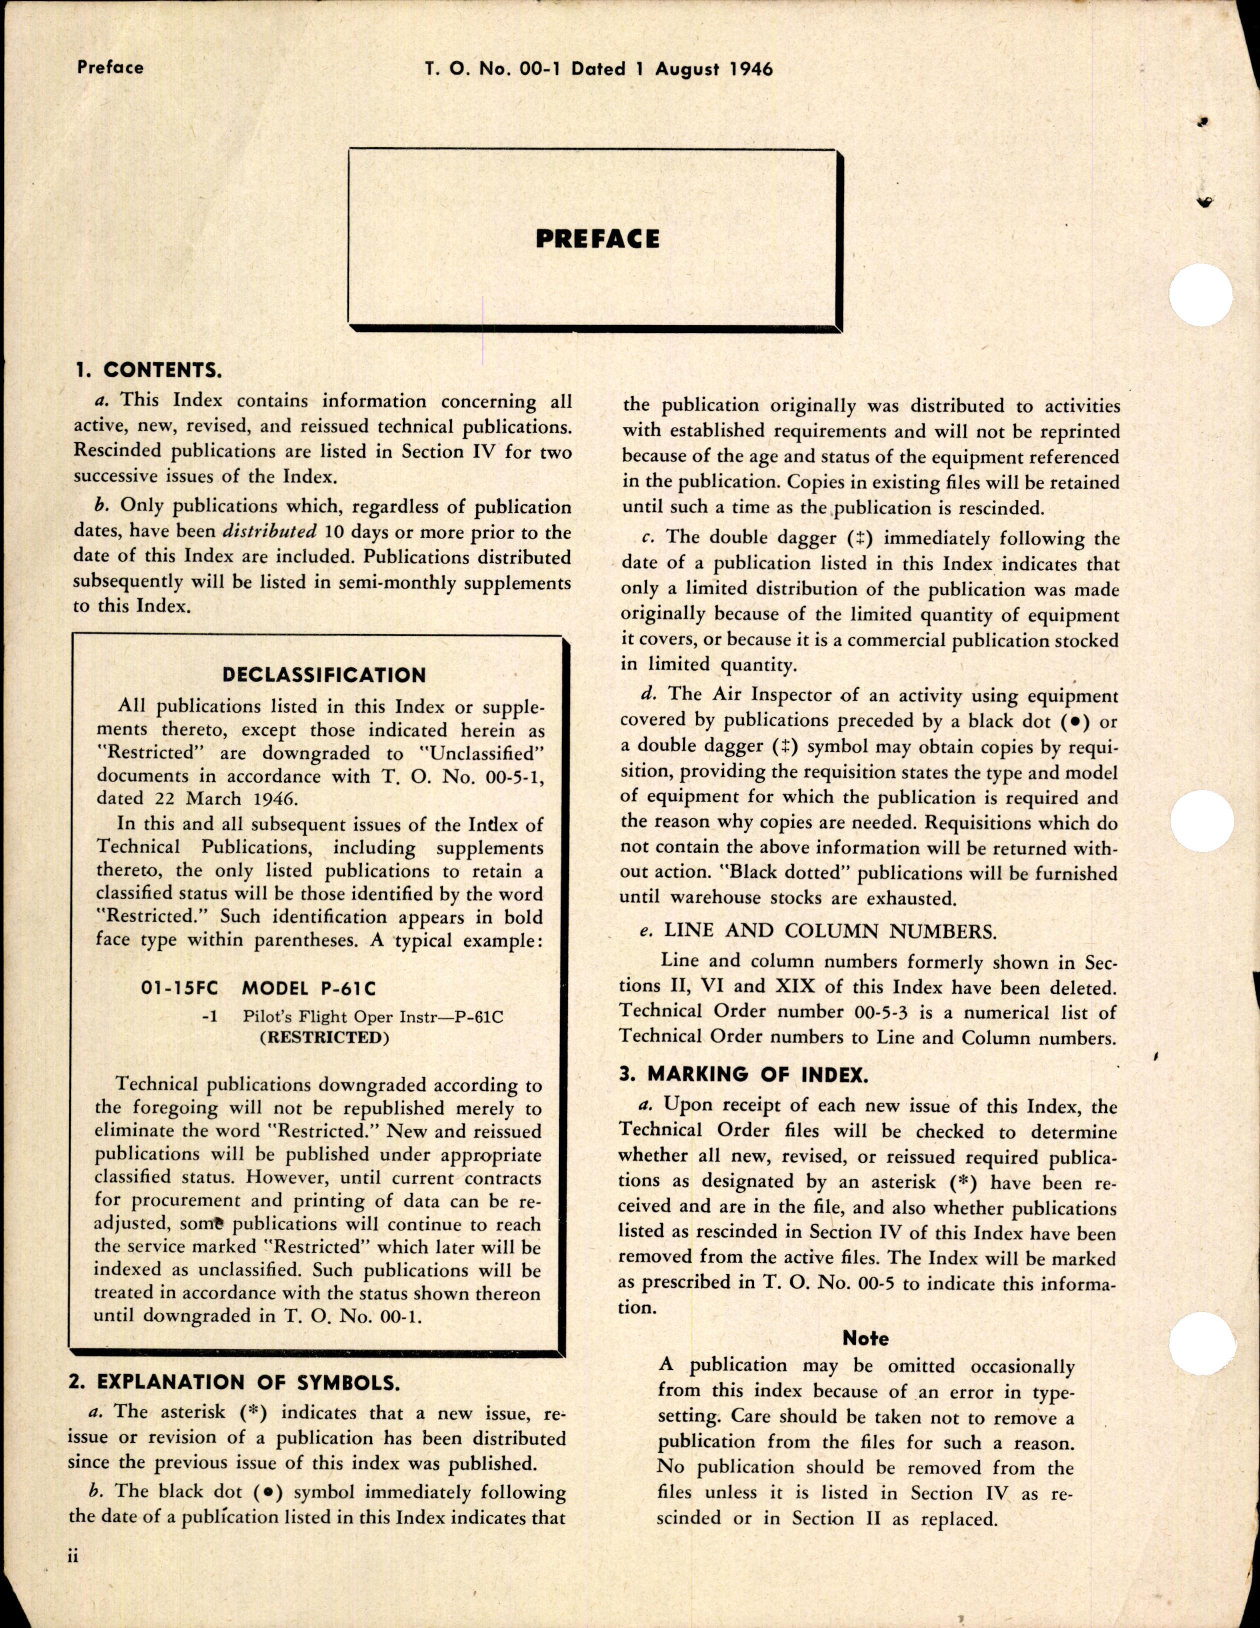 Sample page 4 from AirCorps Library document: Numerical Index of Technical Publications